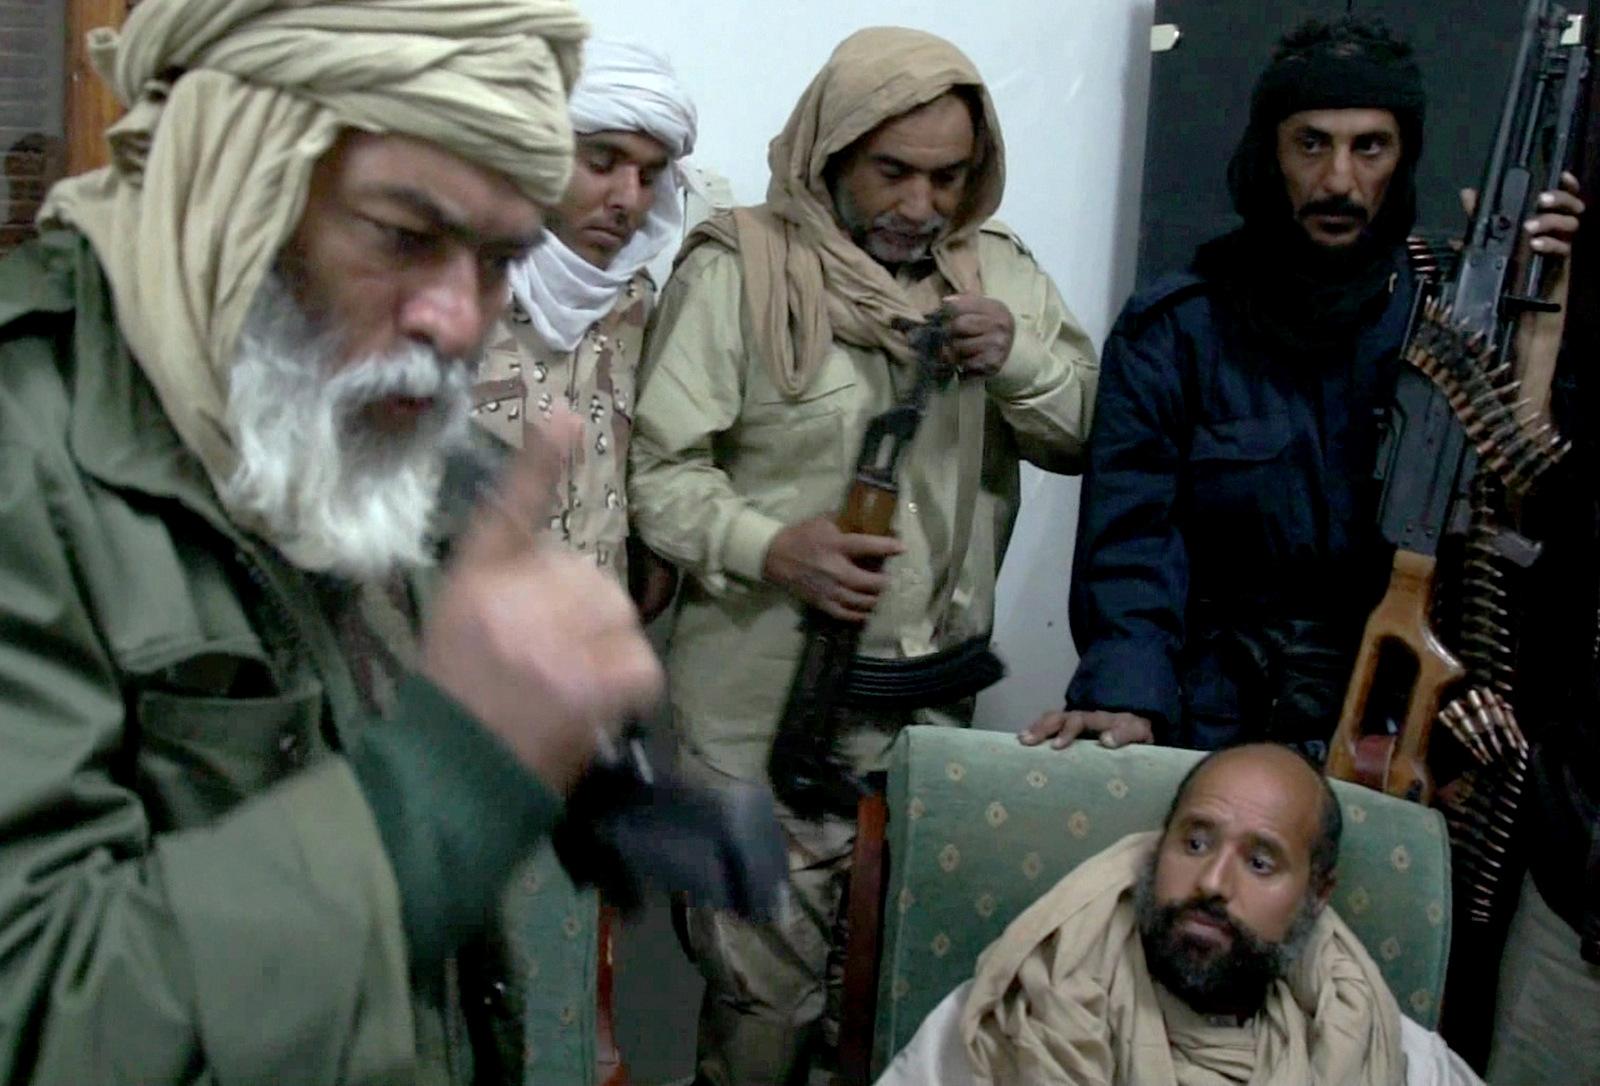 In this image taken from video made available Tuesday, Nov. 22, 2011, Moammar Gadhafi's son Saif al-Islam Gaddafi, below right, is surrounded by Libyan captors shortly after his capture on Nov. 19, 2011, at a safe house in the town of Zintan, Libya. The video shows Seif al-Islam arguing with his captors and admonishing them, saying that Libya's regions that were united in revolution will turn against each other in the near future and rip the country apart. (AP/APTN)